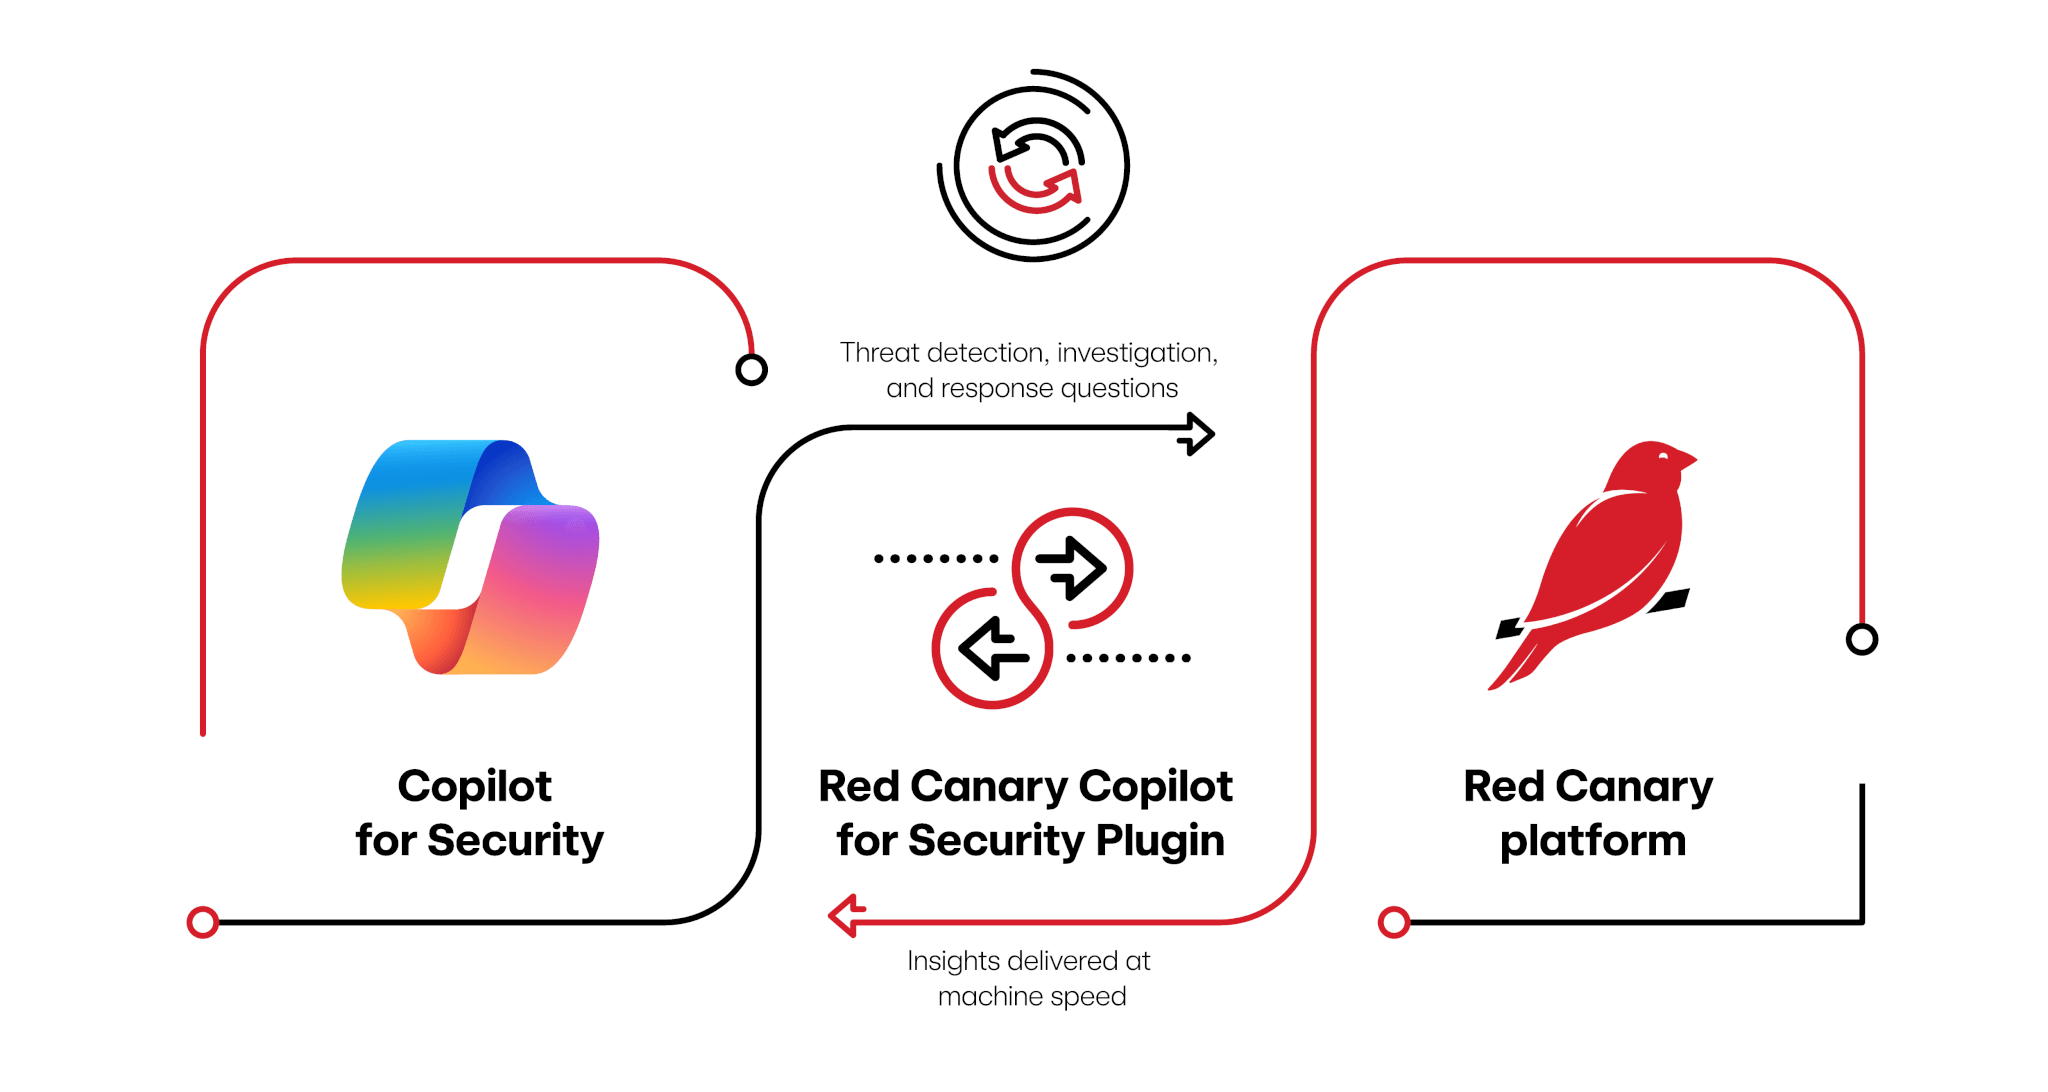 The diagram shows the relationship between Copilot for Security and the Red Canary platform intermediated by the Red Canary Copilot for Security Plugin. The customer can questions about threat detection, investigation, and response via Copilot, and they receive responses at machine speed in Copilot from Red Canary via the Plugin.|